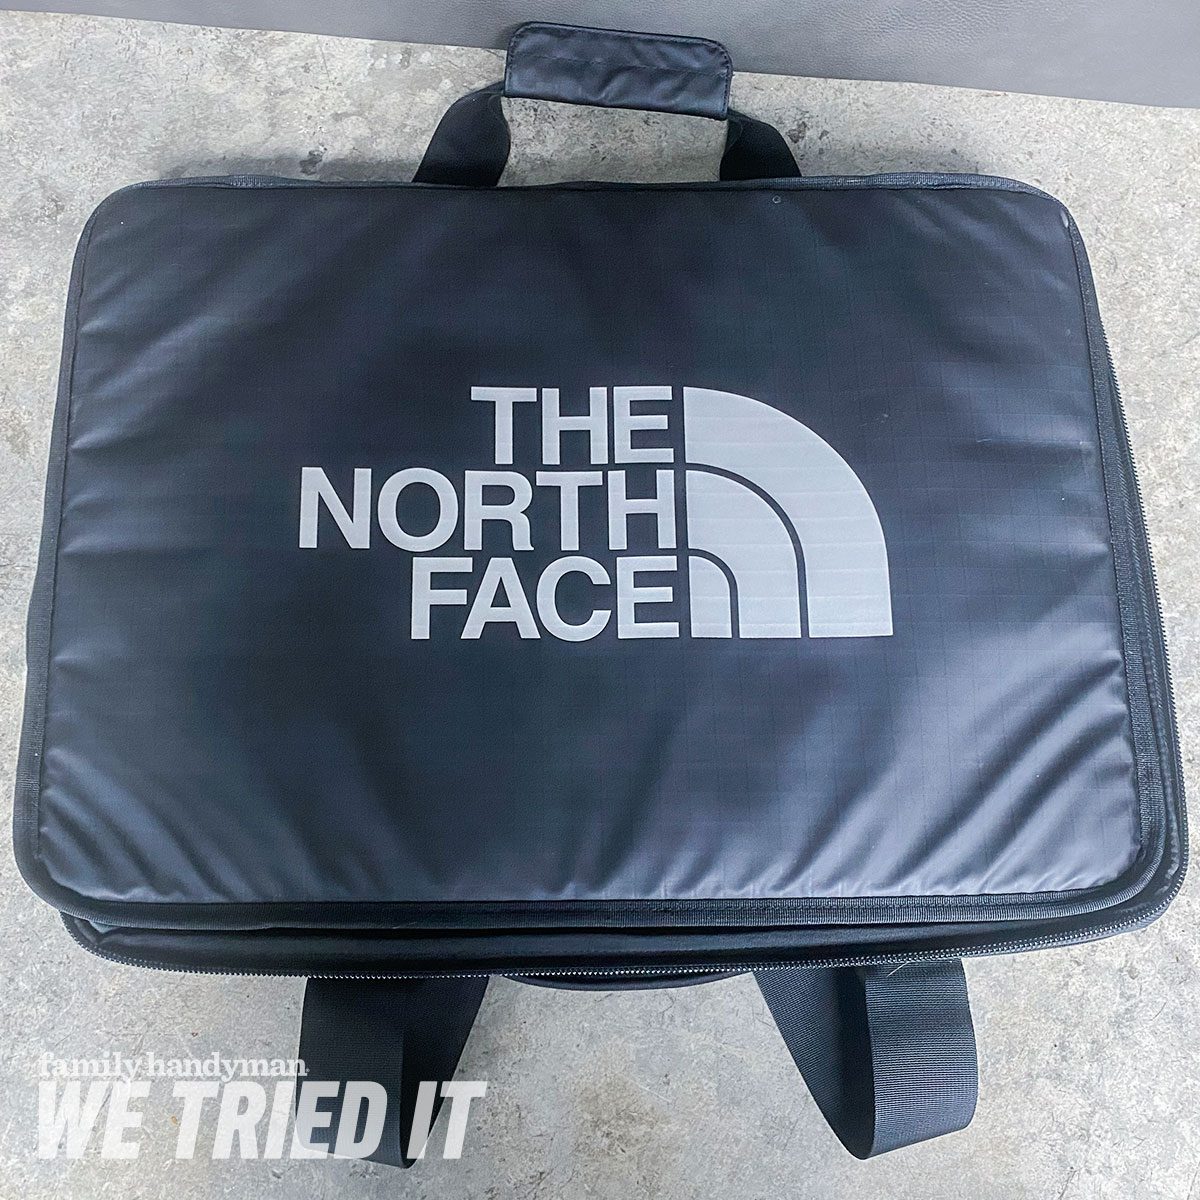 North Face Base Camp Gear Box Review: Testing the Limits